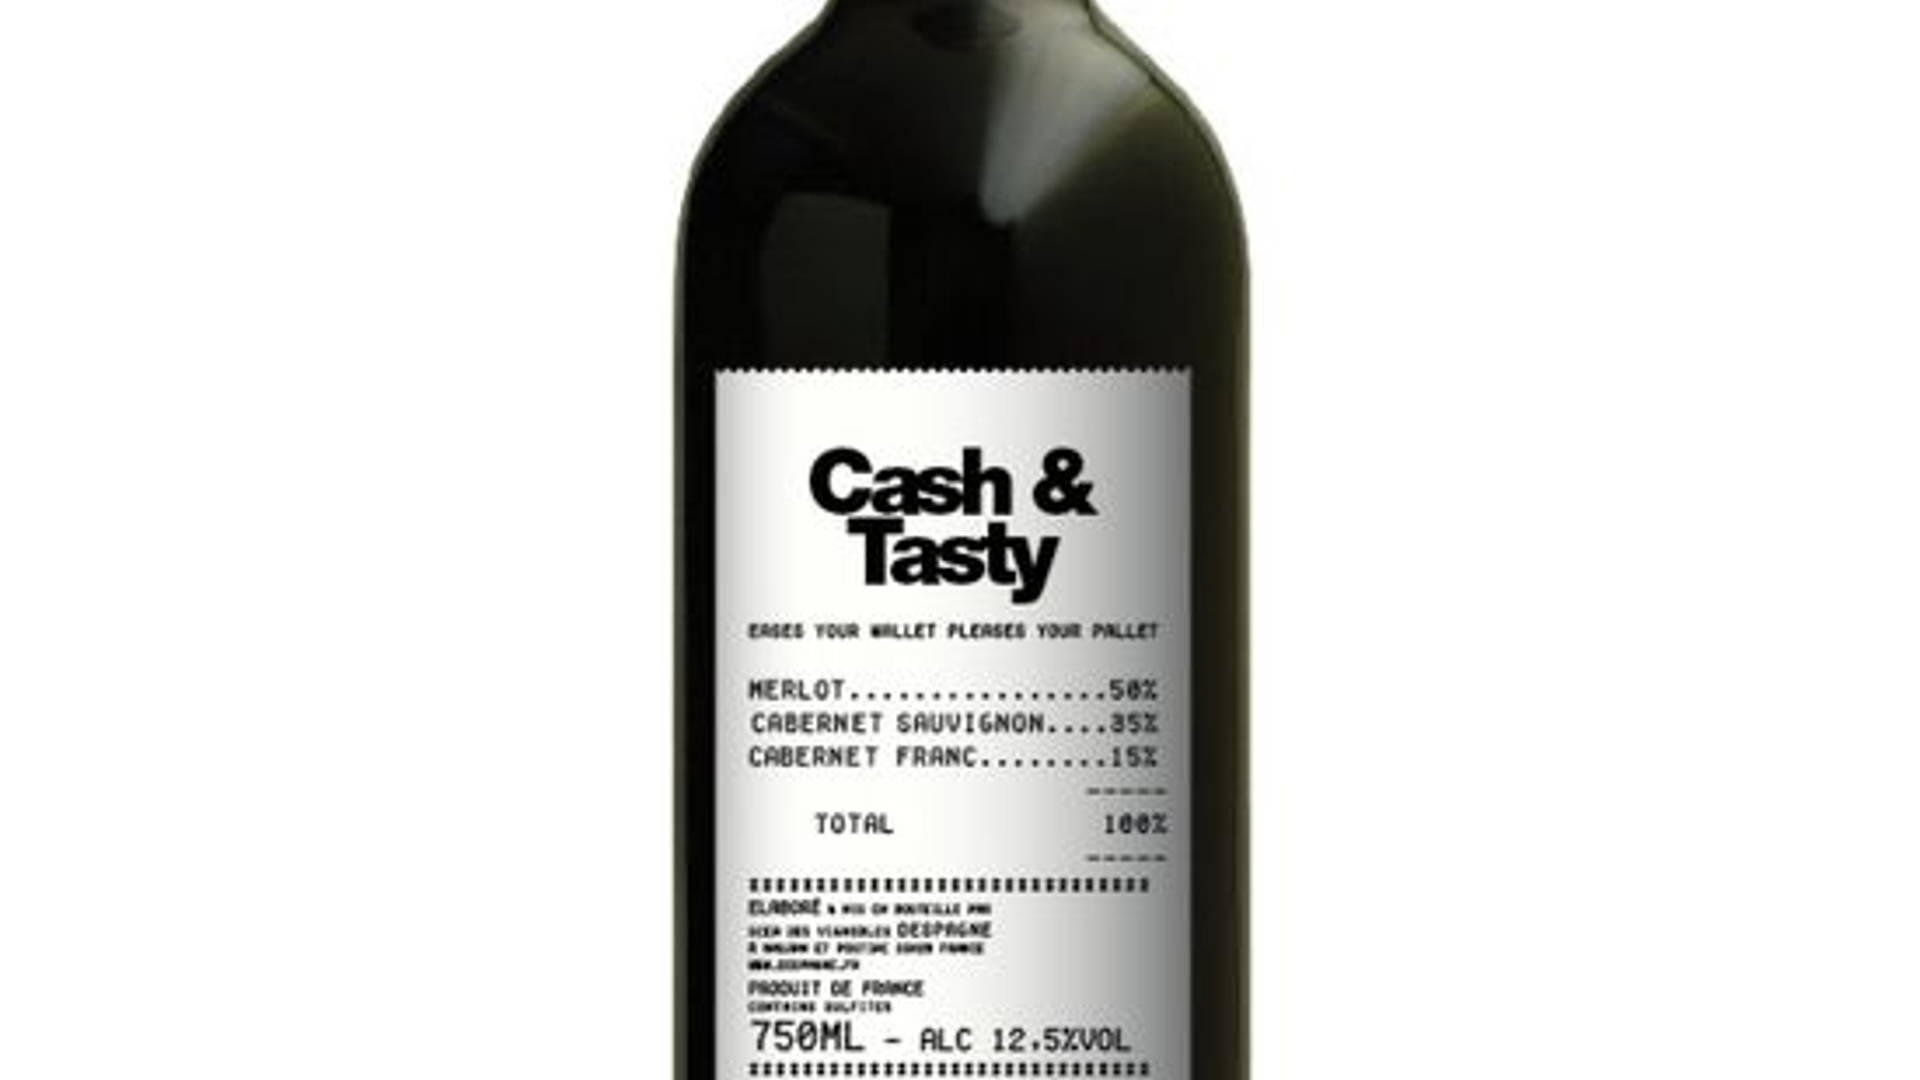 Featured image for Cash & Tasty "Recession Wine"